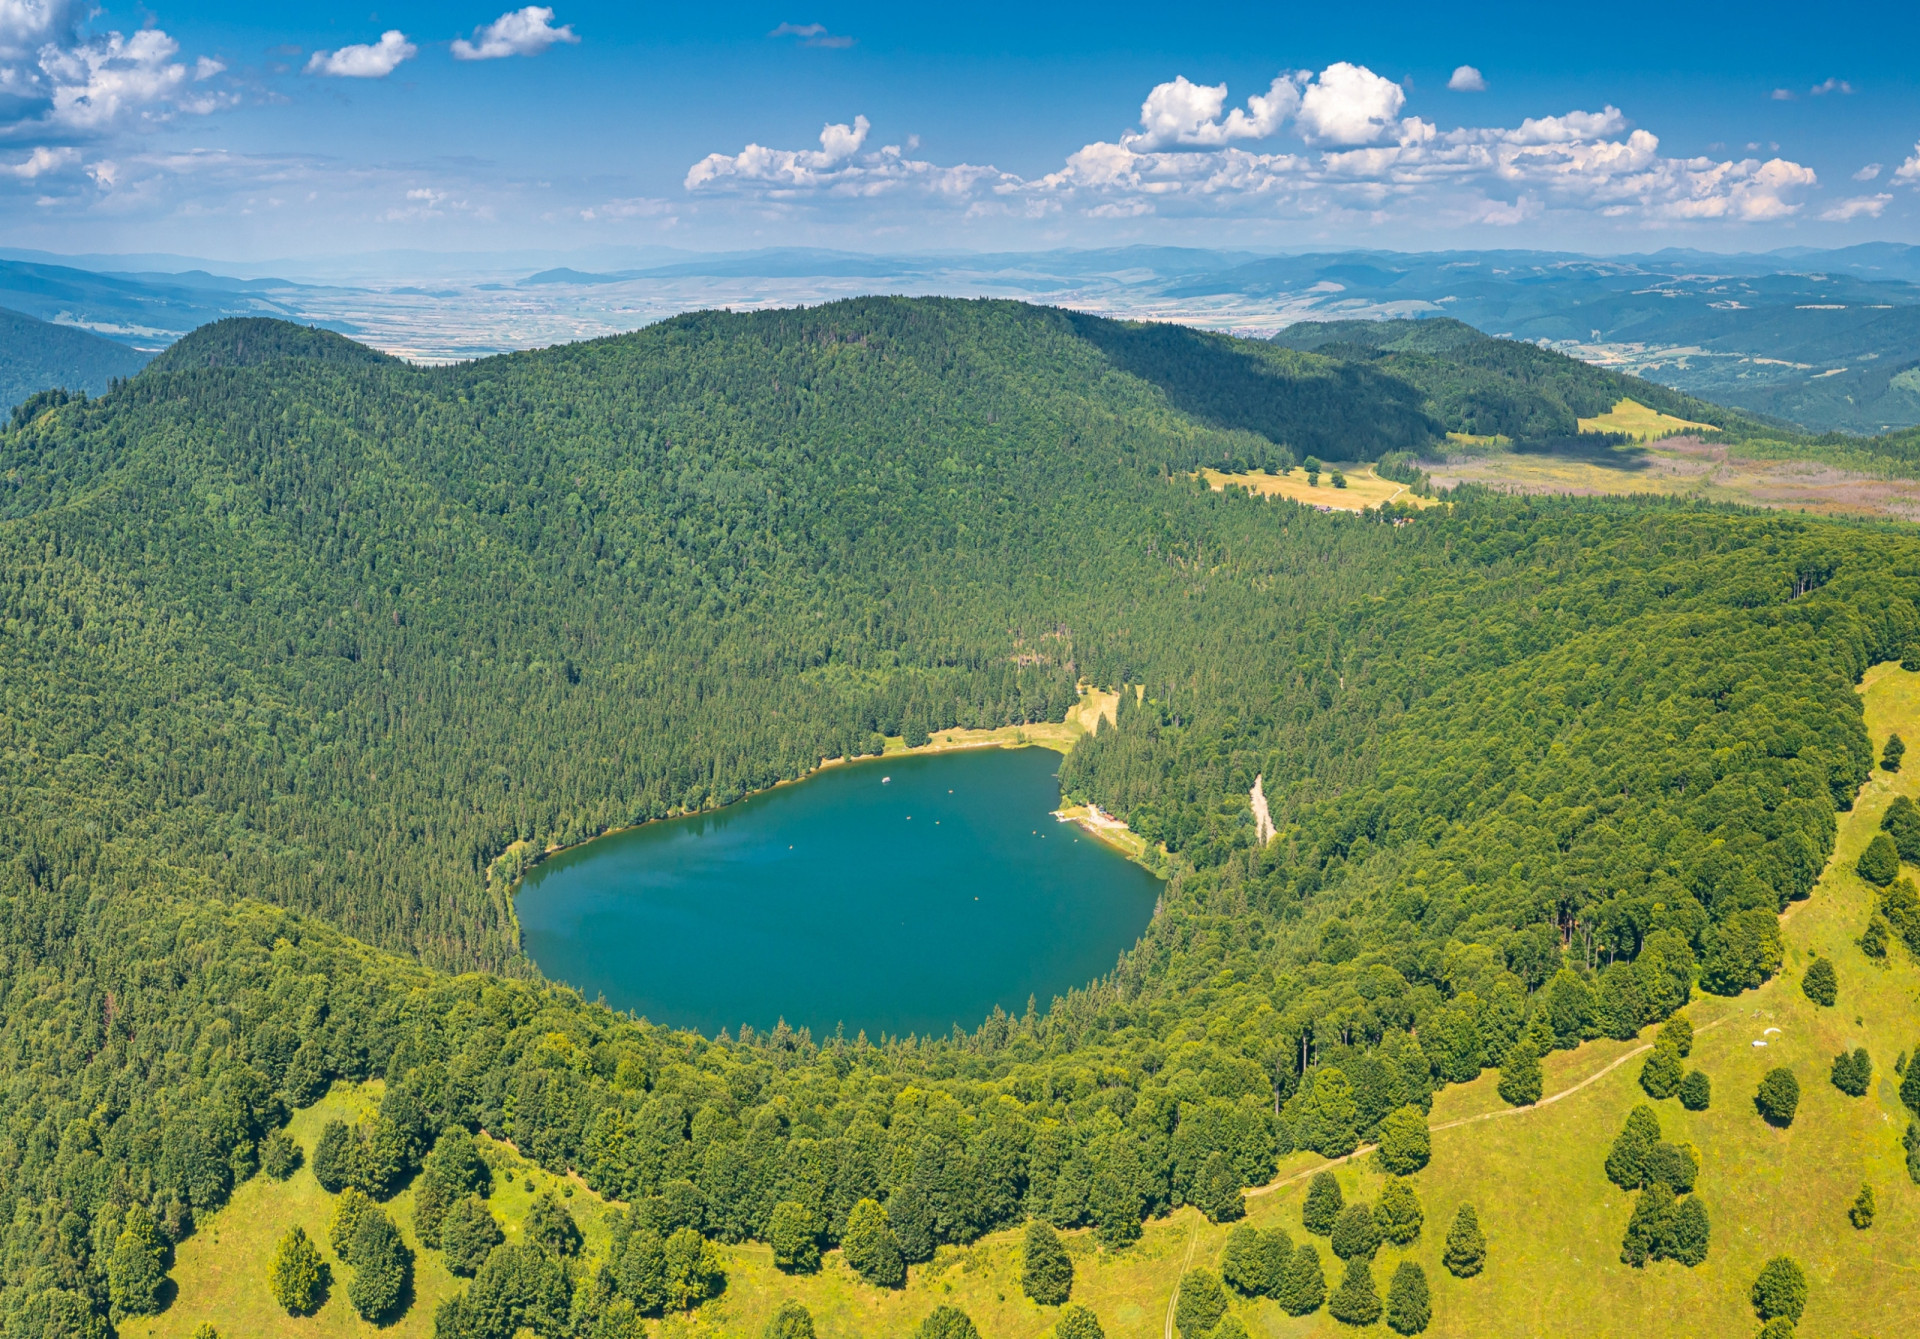 <p>Ciomad in Romania is a bucolic picture of peace and tranquility. And while the last eruption was recorded 7,000 years ago, this volcano is still regarded as dormant. But seismic activity is frequently recorded, and the release of carbon dioxide from bubbling pools and bogs is a common occurrence.</p><p><a href="https://www.msn.com/en-us/community/channel/vid-7xx8mnucu55yw63we9va2gwr7uihbxwc68fxqp25x6tg4ftibpra?cvid=94631541bc0f4f89bfd59158d696ad7e">Follow us and access great exclusive content every day</a></p>